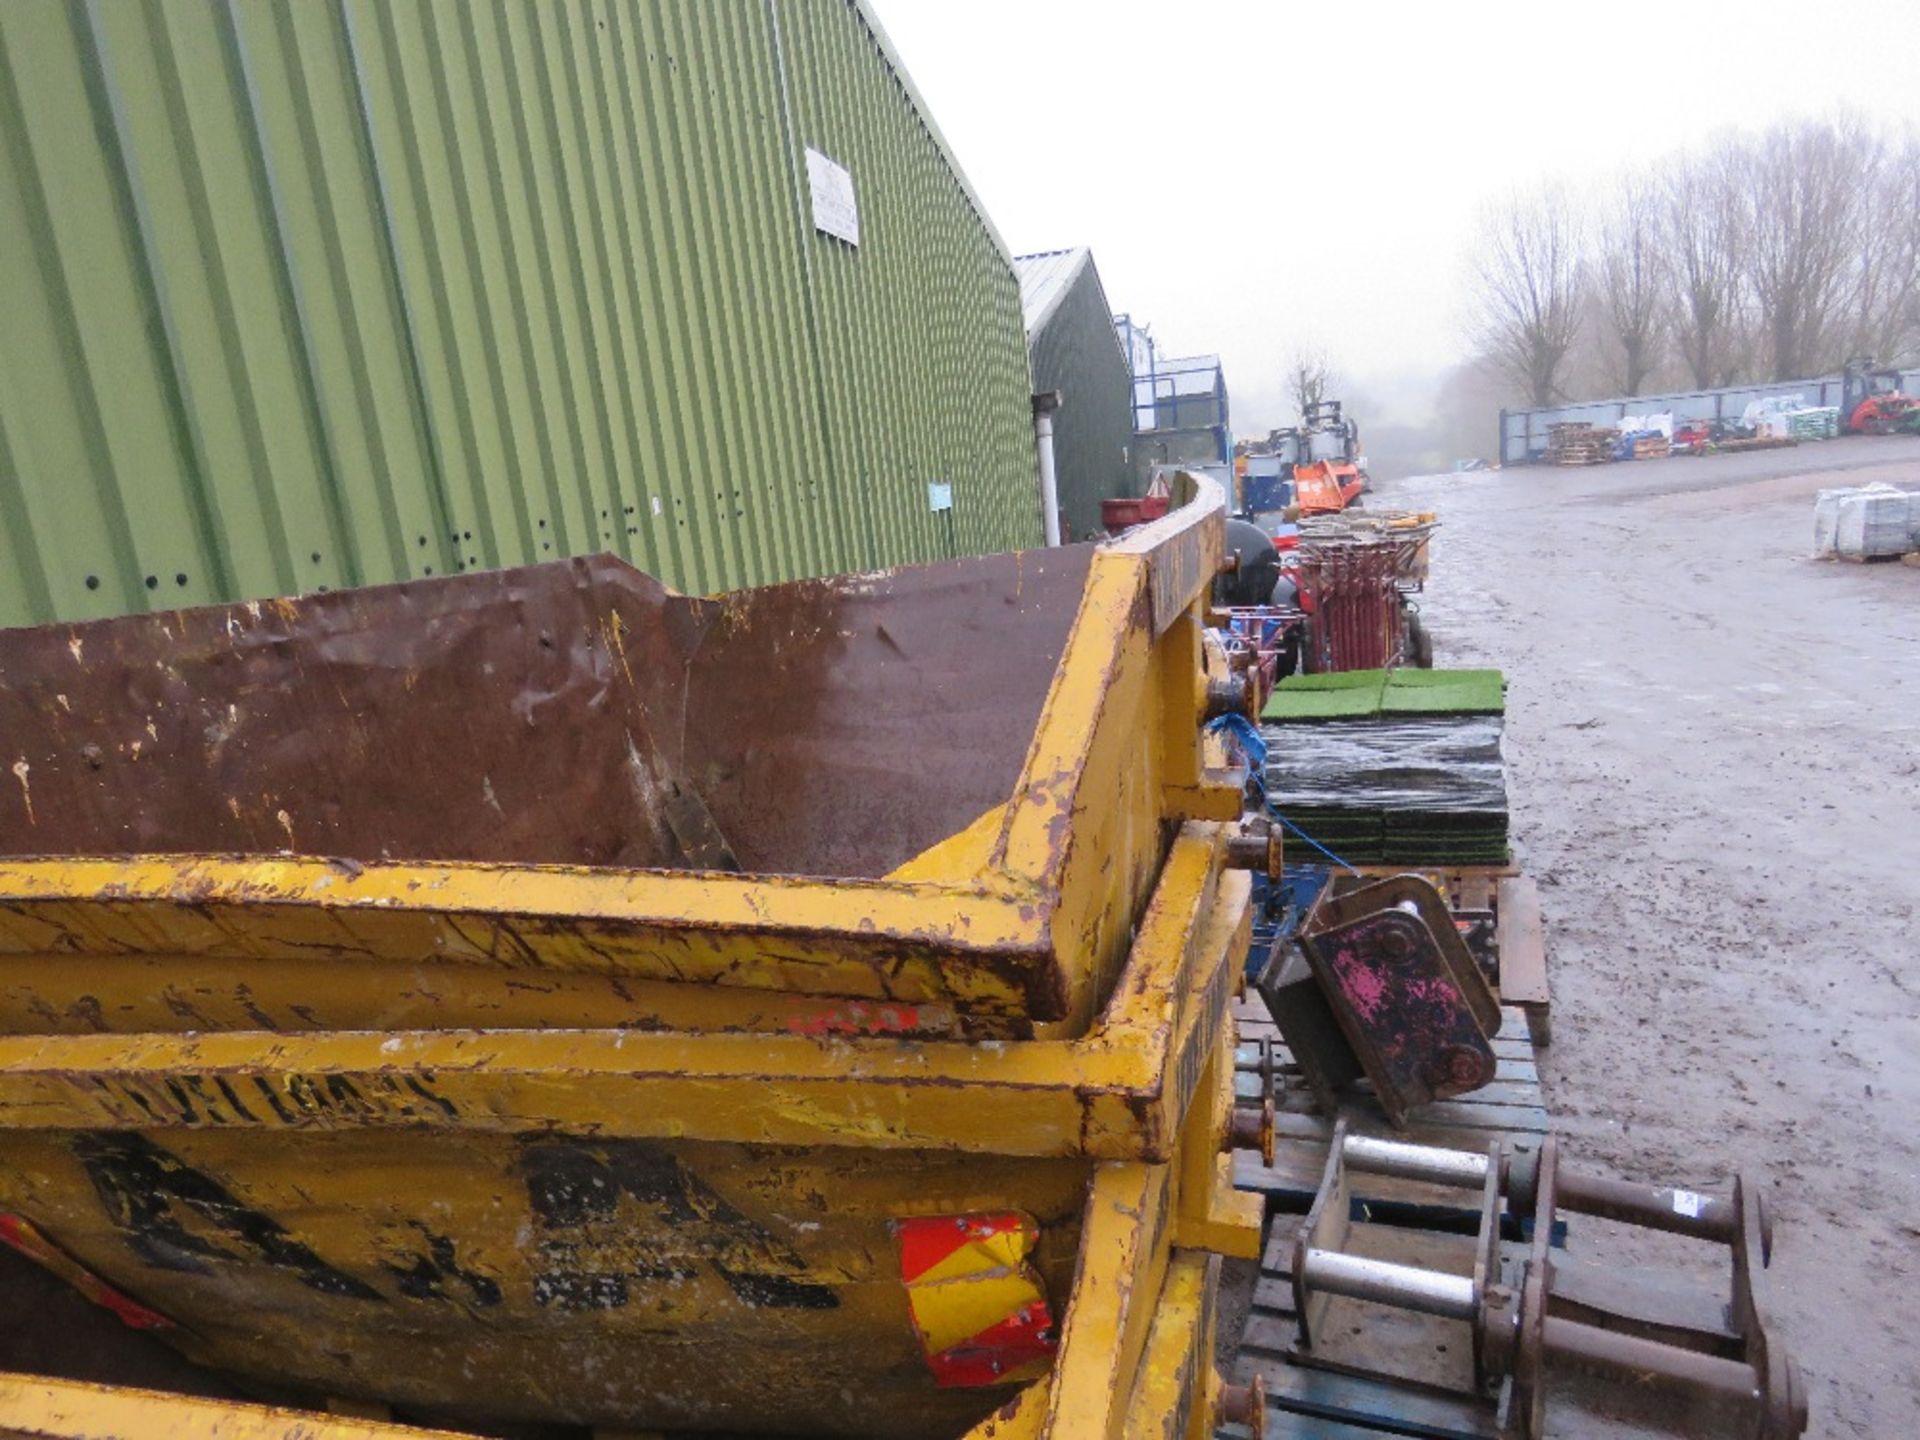 STACK OF 4 X CHAIN LIFT SKIPS, FLOORS LOOKED SOUND FROM INITIAL INSPECTION. - Image 4 of 4